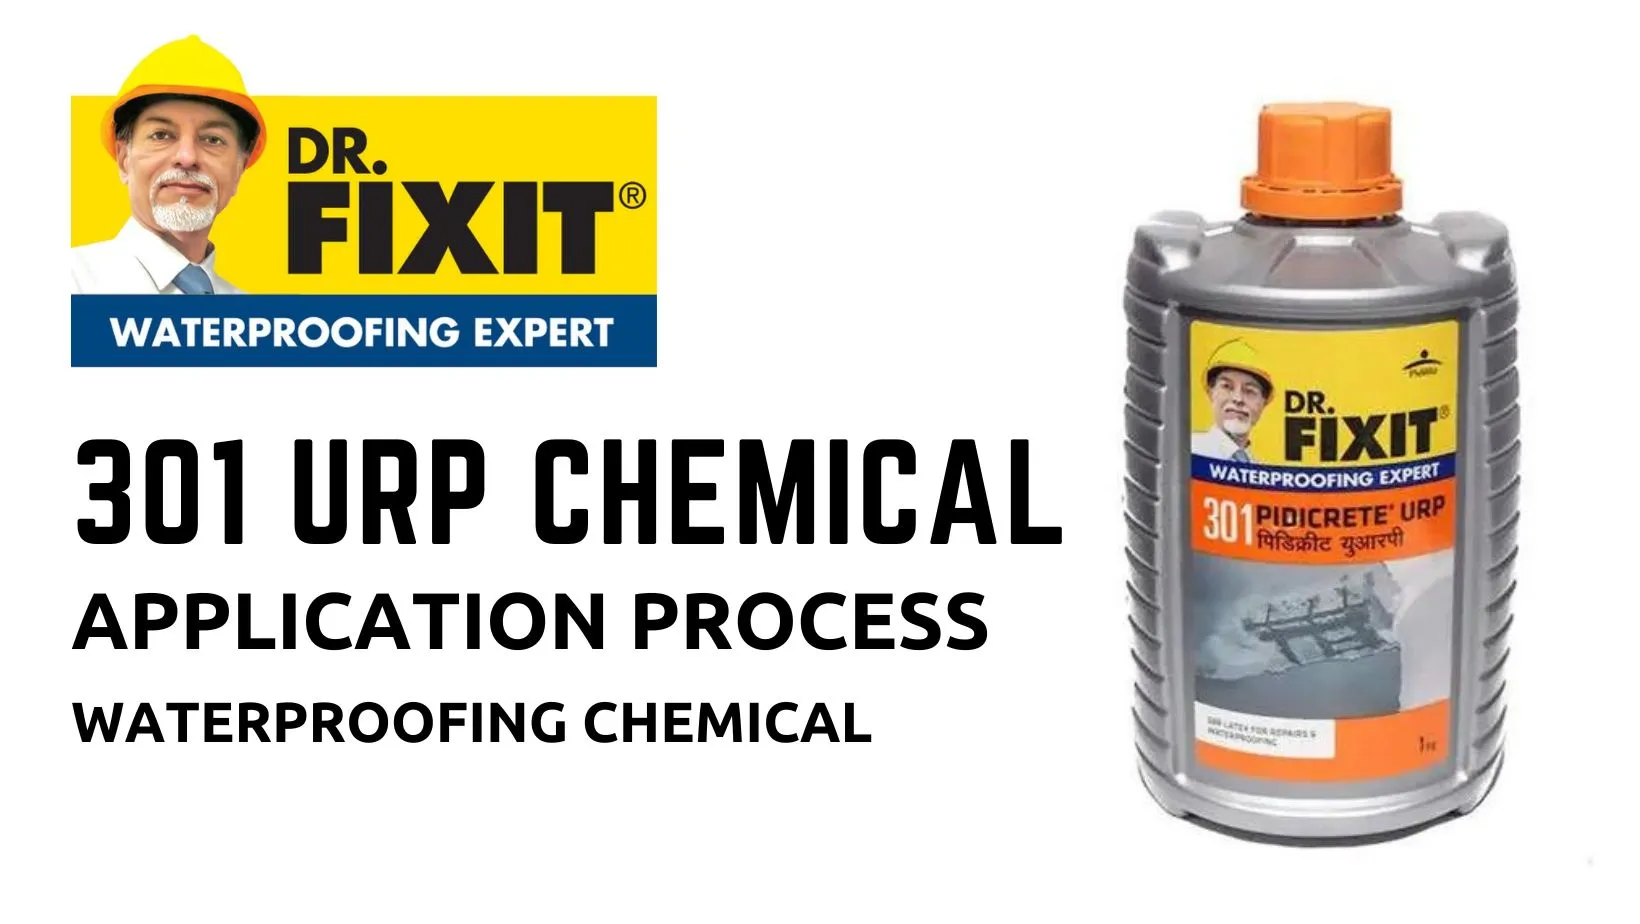 301 urp chemical waterproofing solutions services